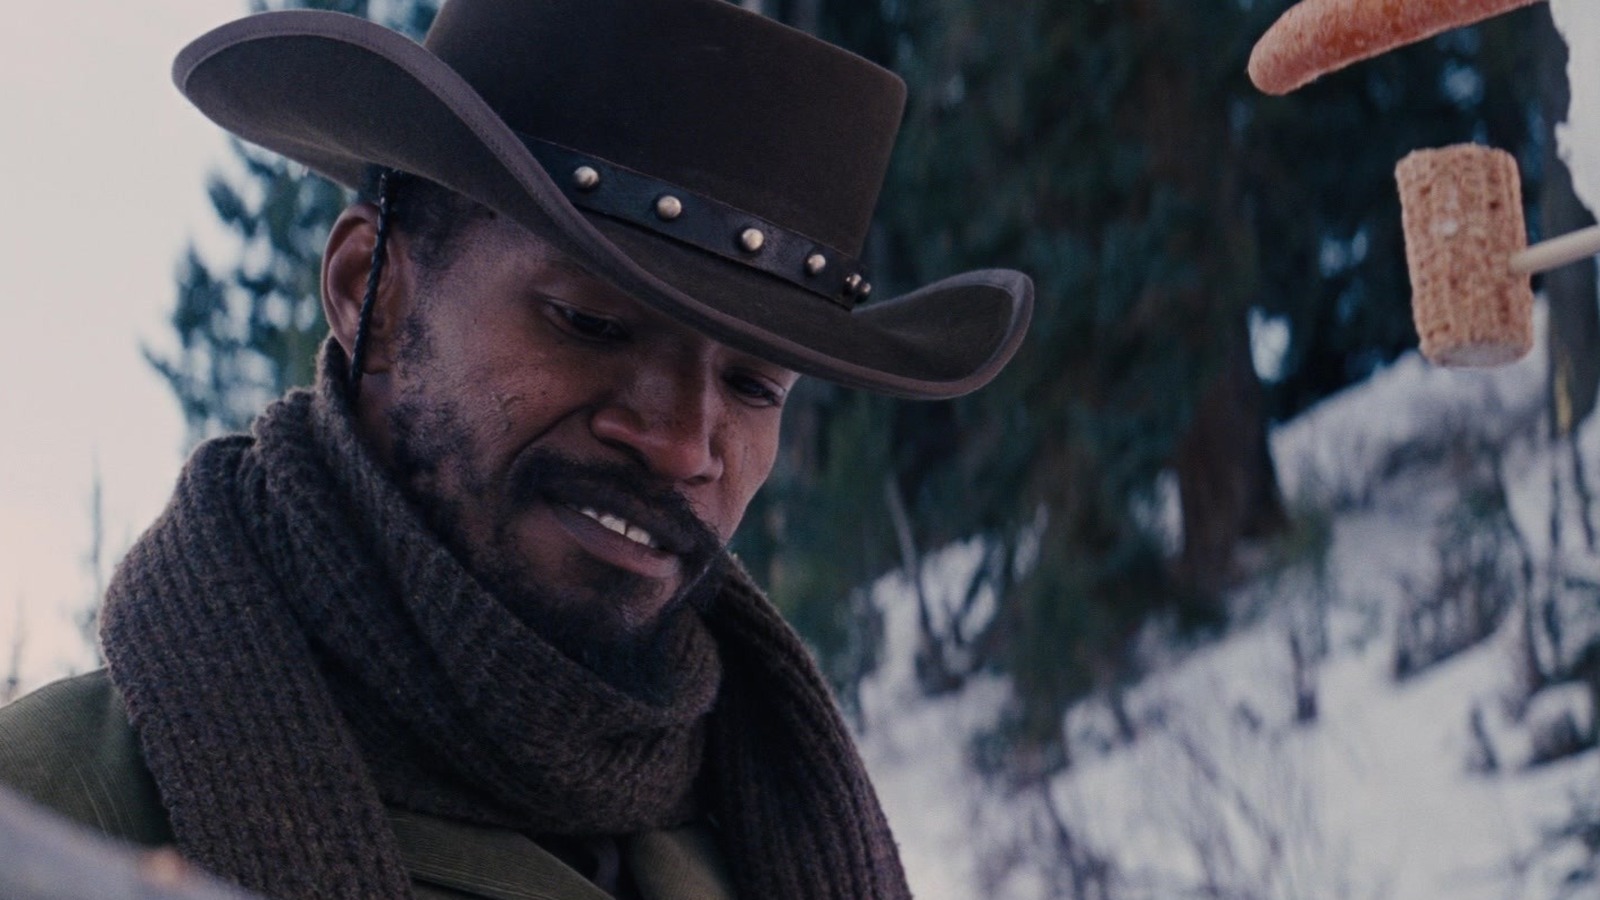 Turning Django Unchained Snowy Quickdraw Scene was a tricky technical process